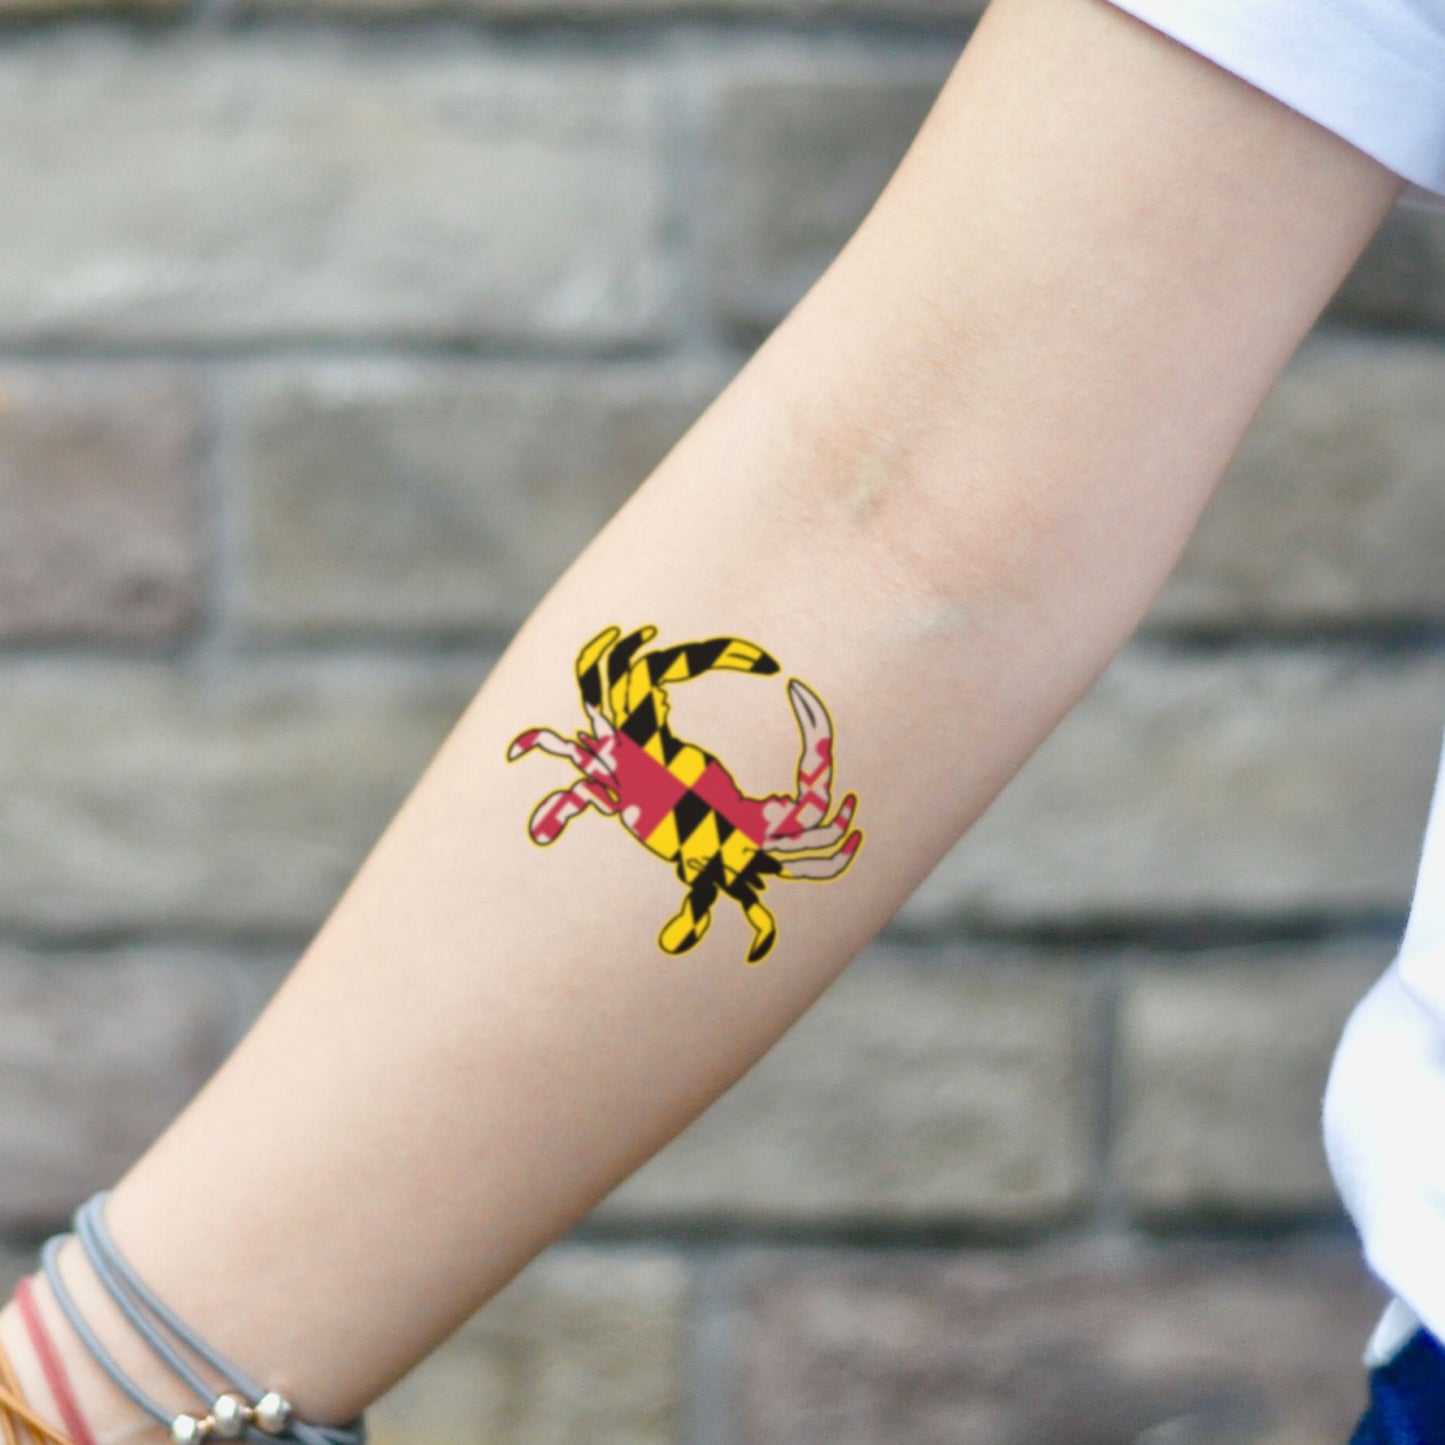 fake small maryland flag crab color temporary tattoo sticker design idea on inner arm